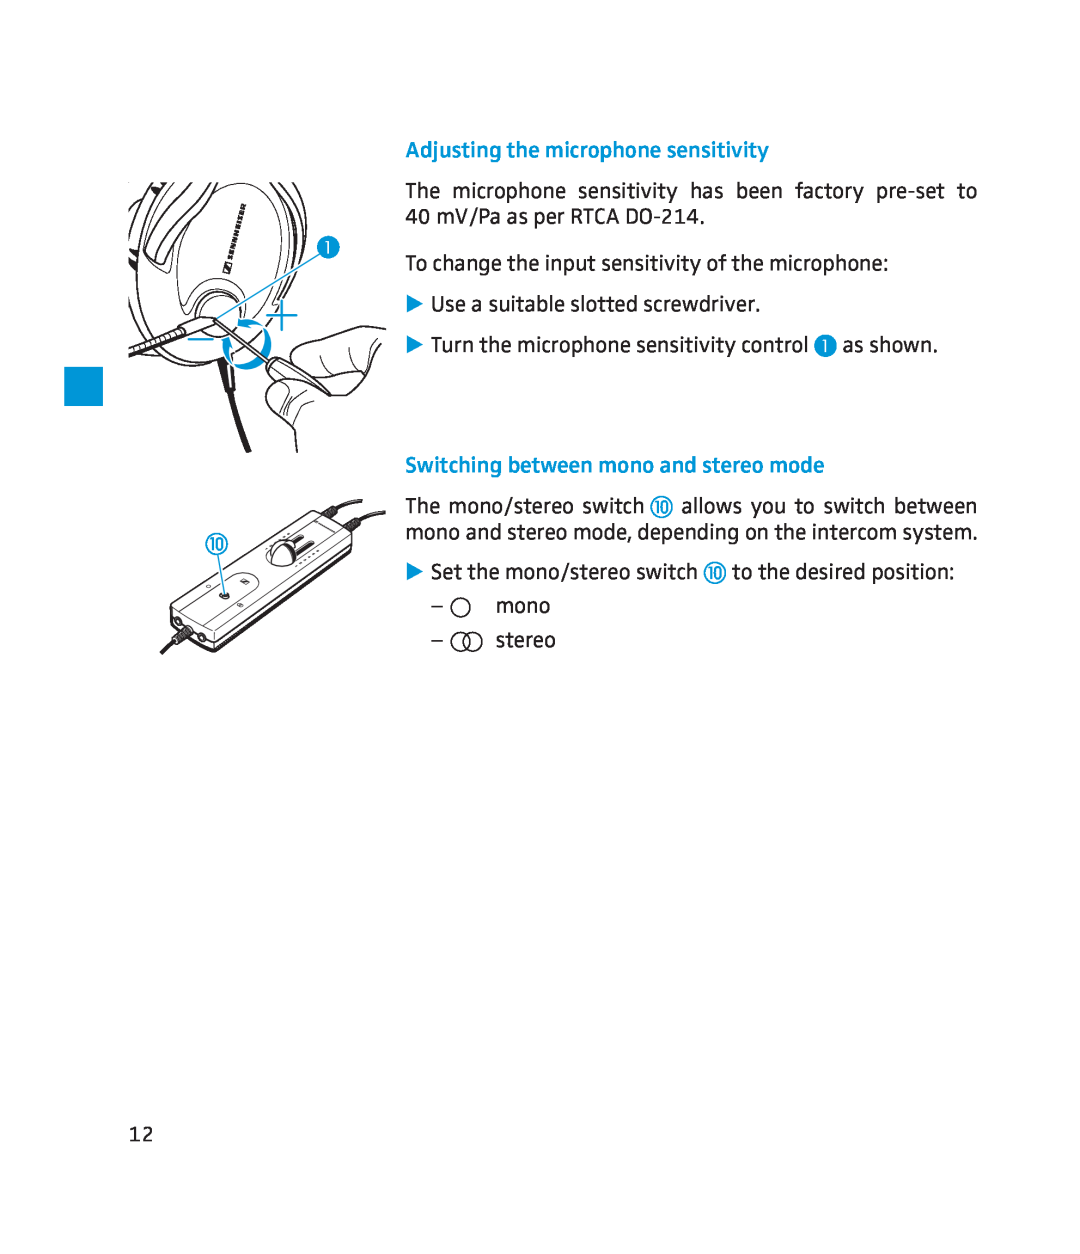 Sennheiser 250 instruction manual Adjusting the microphone sensitivity, Switching between mono and stereo mode 